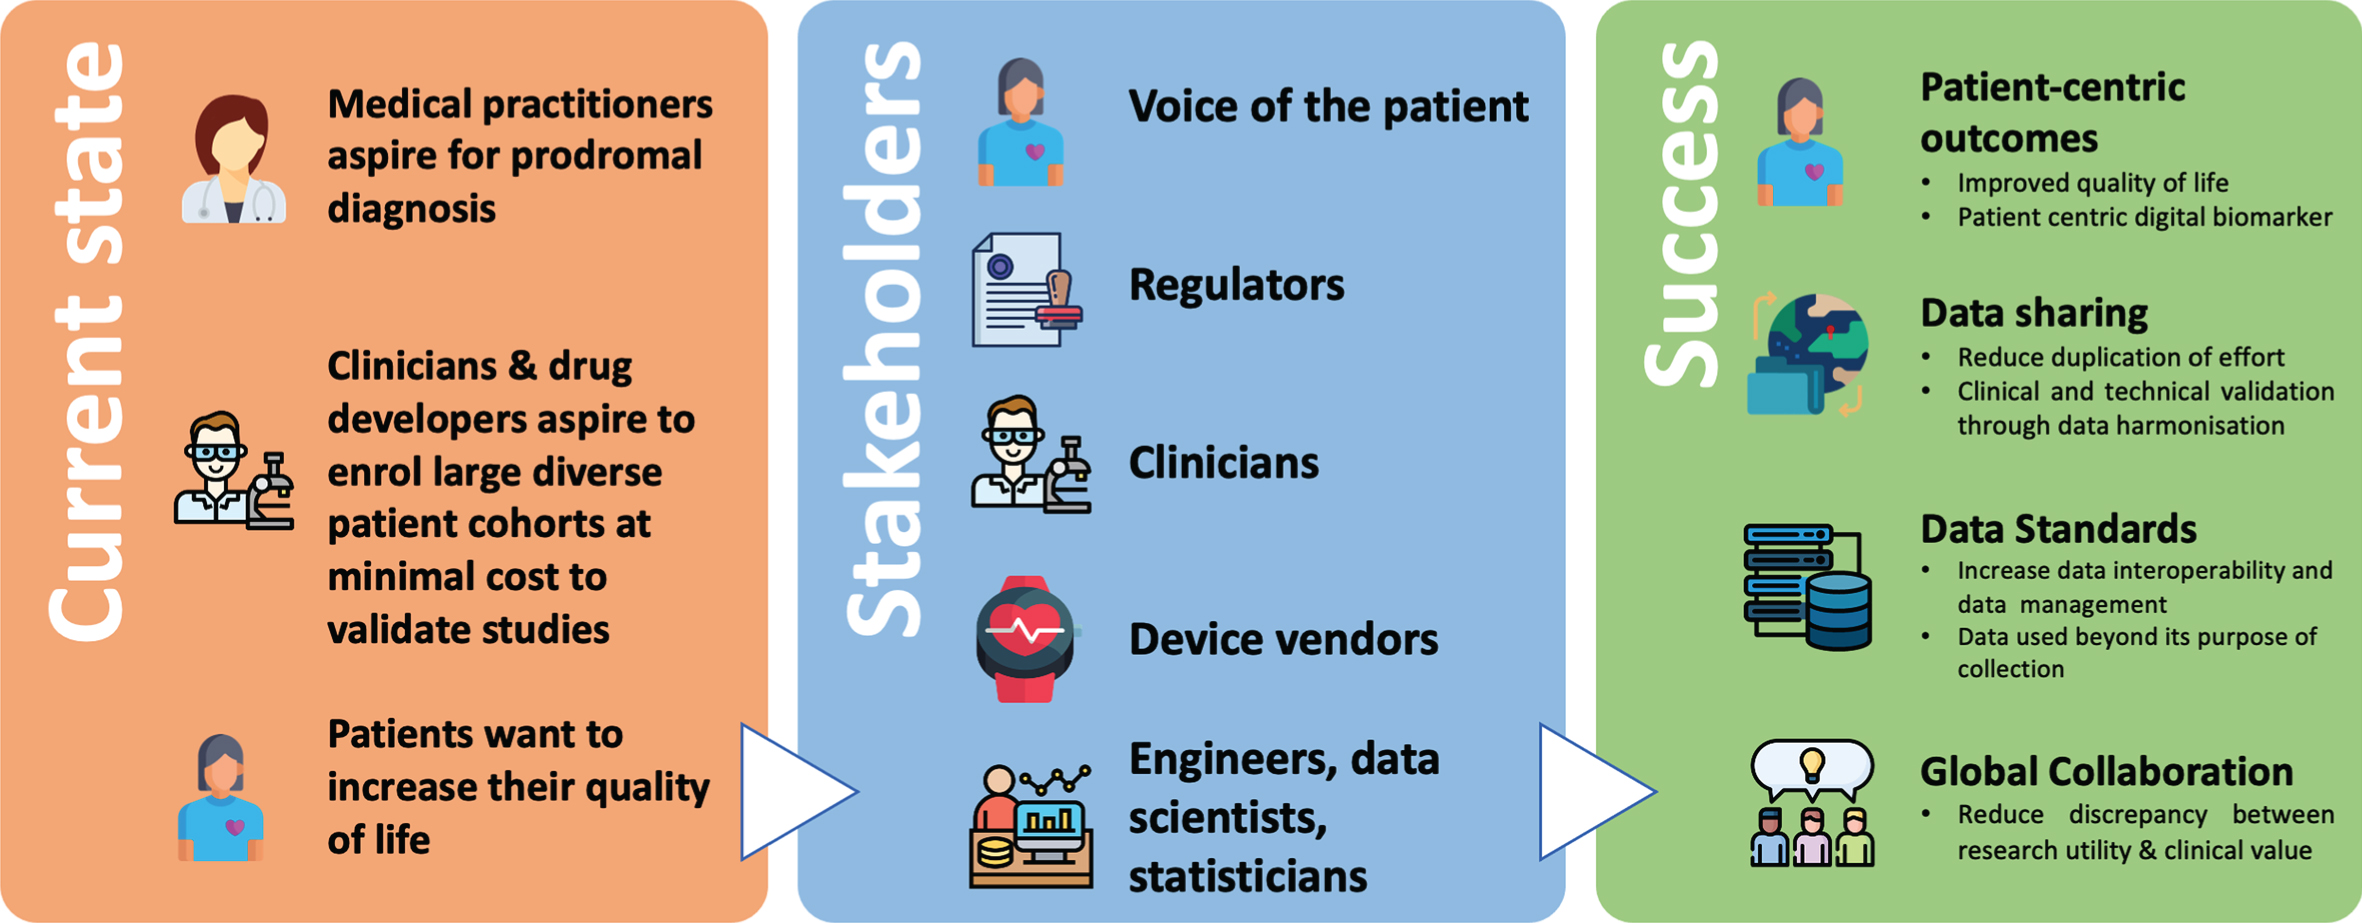 Digital Biomarkers for Parkinson’s Disease: Opportunities for the future. An overview of the current state of digital biomarkers for PD, and what success can be achieved by bringing all key stakeholders to collaborate together.